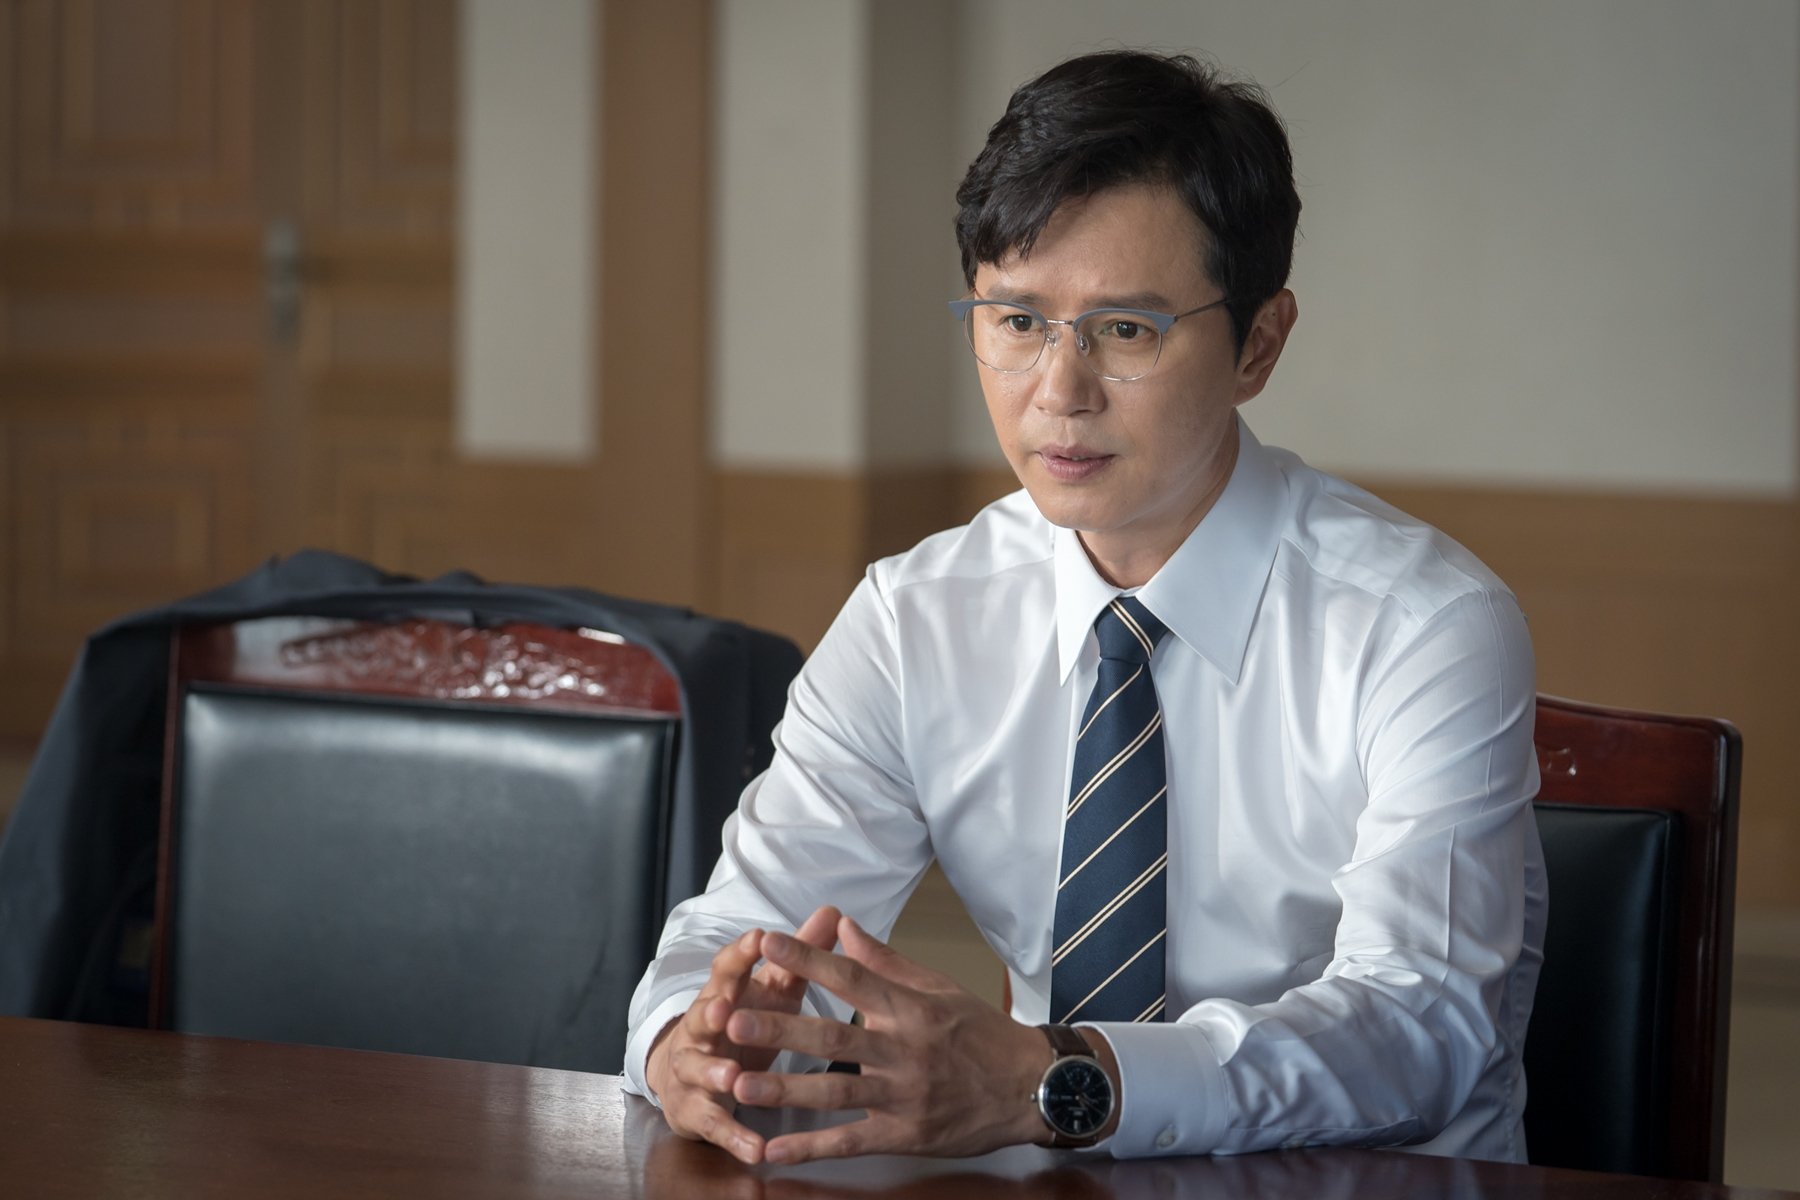 SMTOWN on Twitter: "Actor KIMMINJONG back as '윤한기,' the Blue House senior secretary for affairs, in the new SBS drama 'Vagabond'! Stay tuned for the 'Vagabond,' airing its first